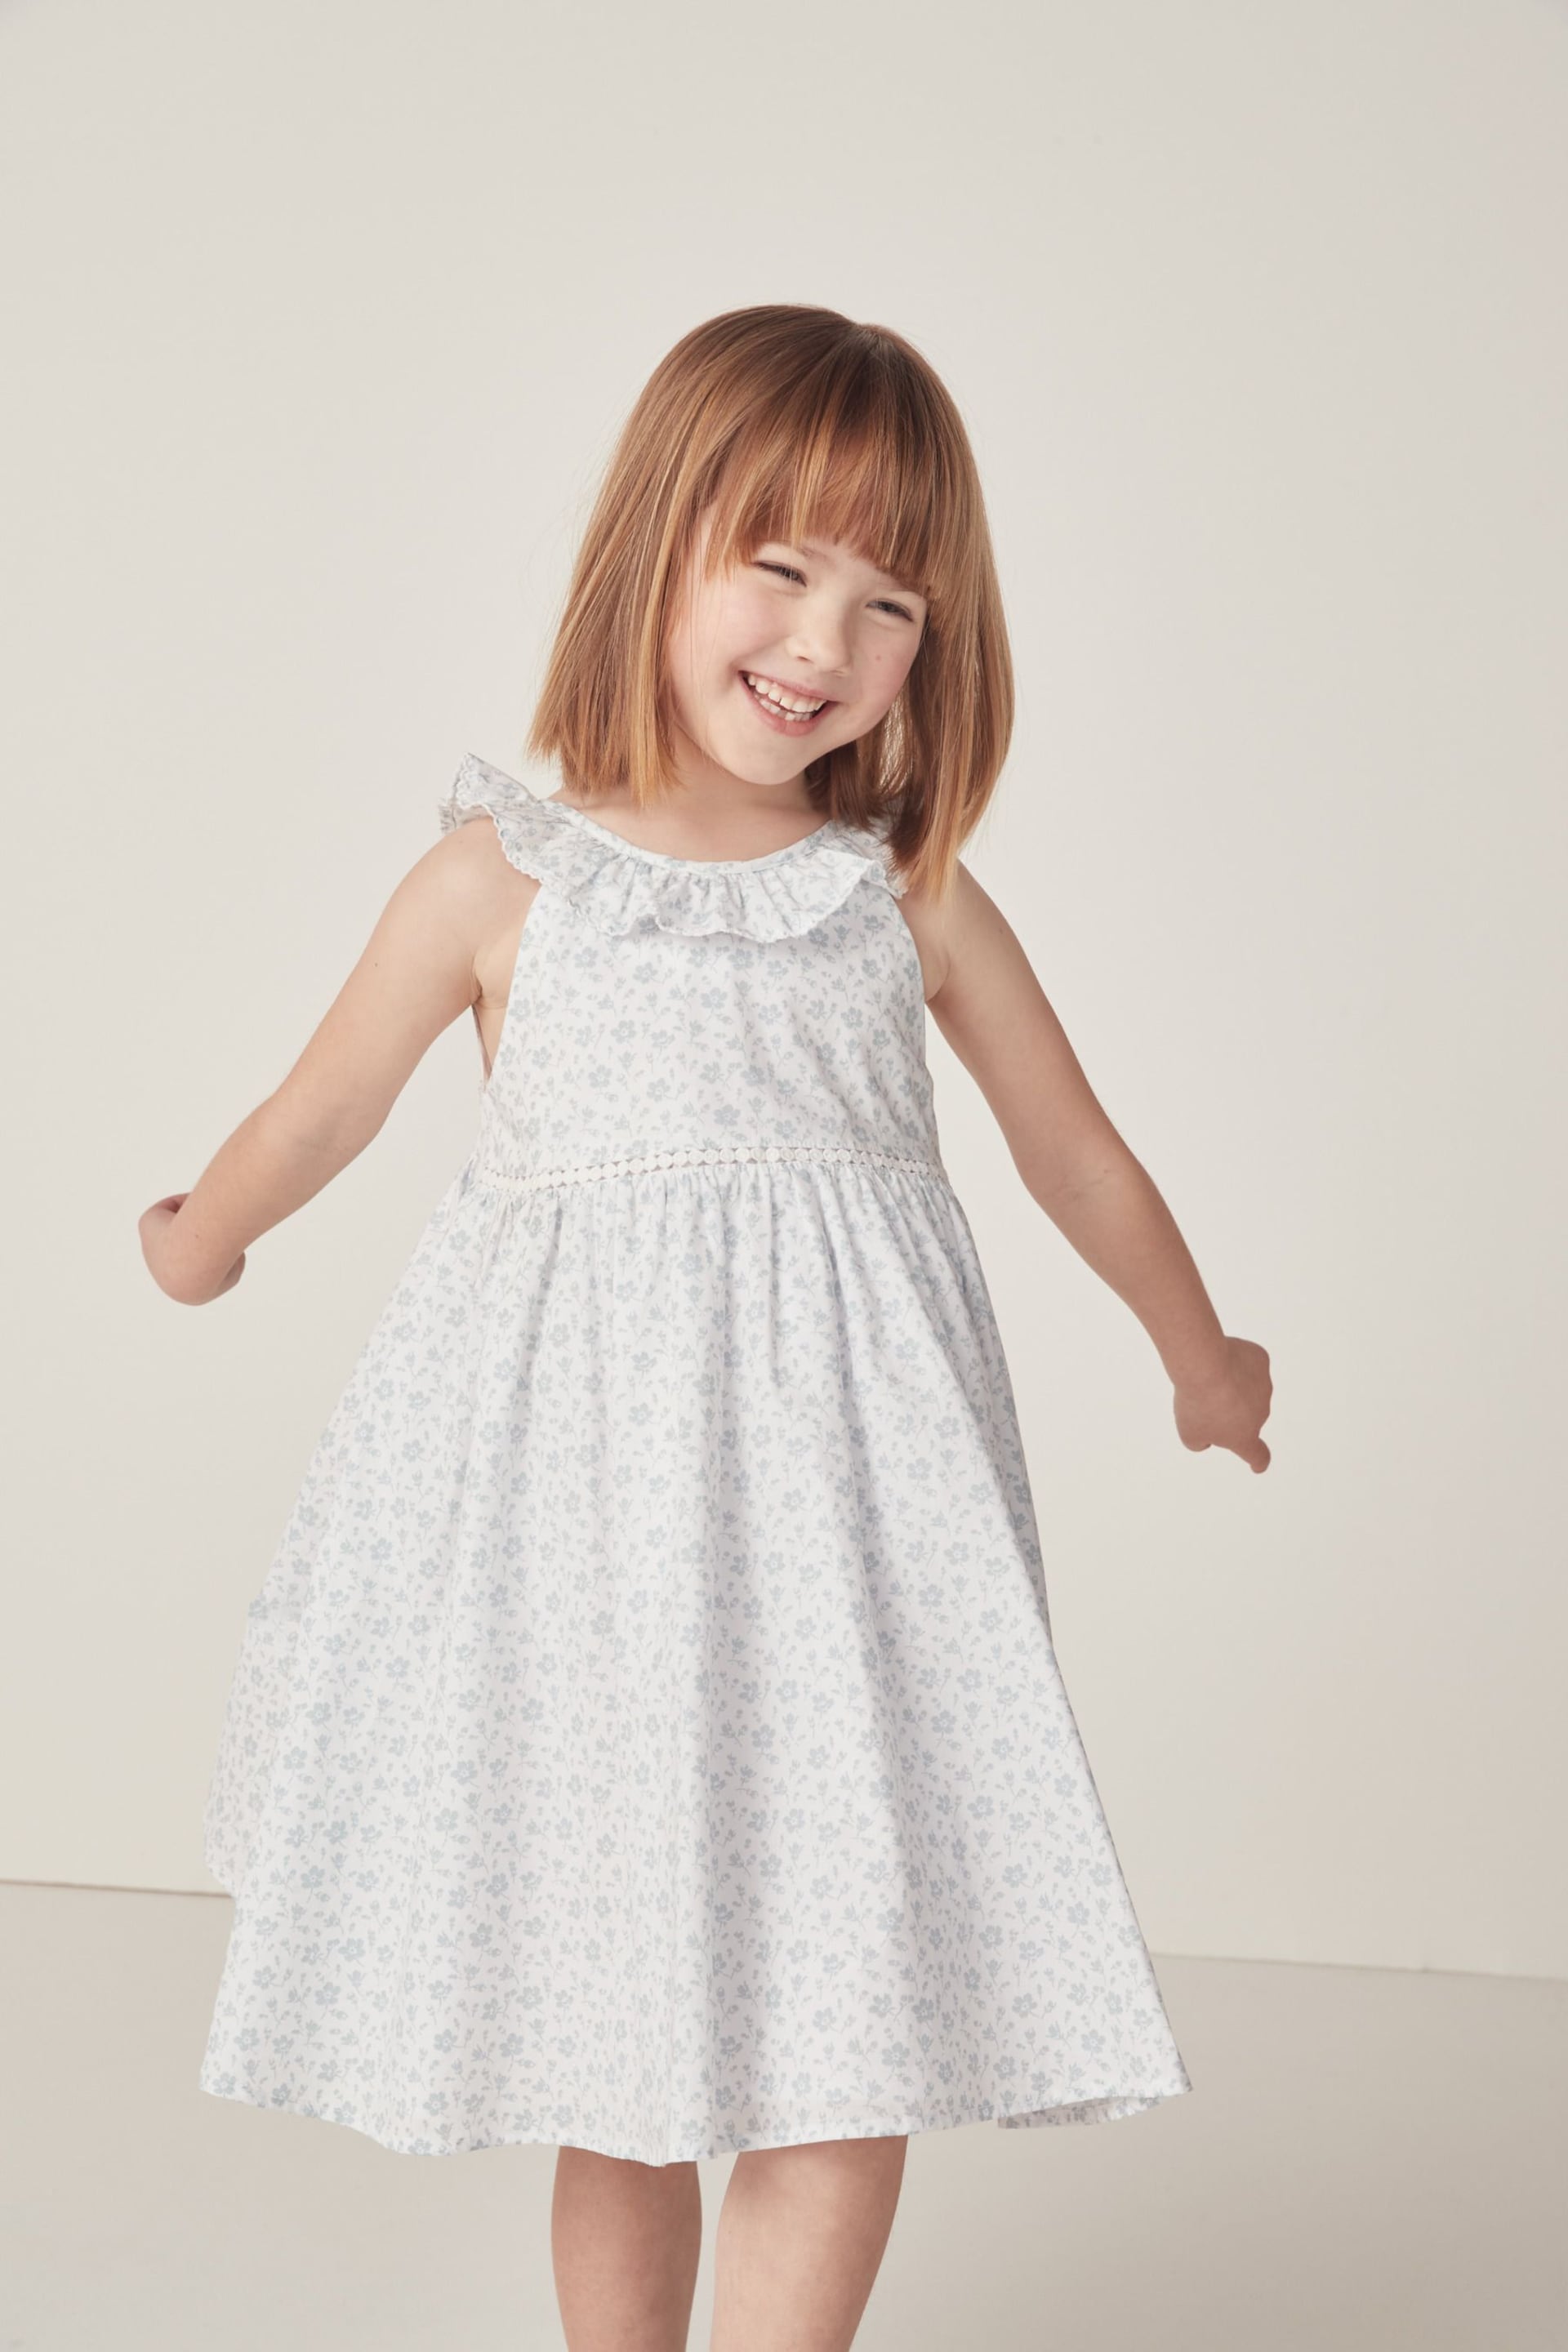 The White Company Blue Margot Floral Cotton Swing Dress - Image 1 of 12